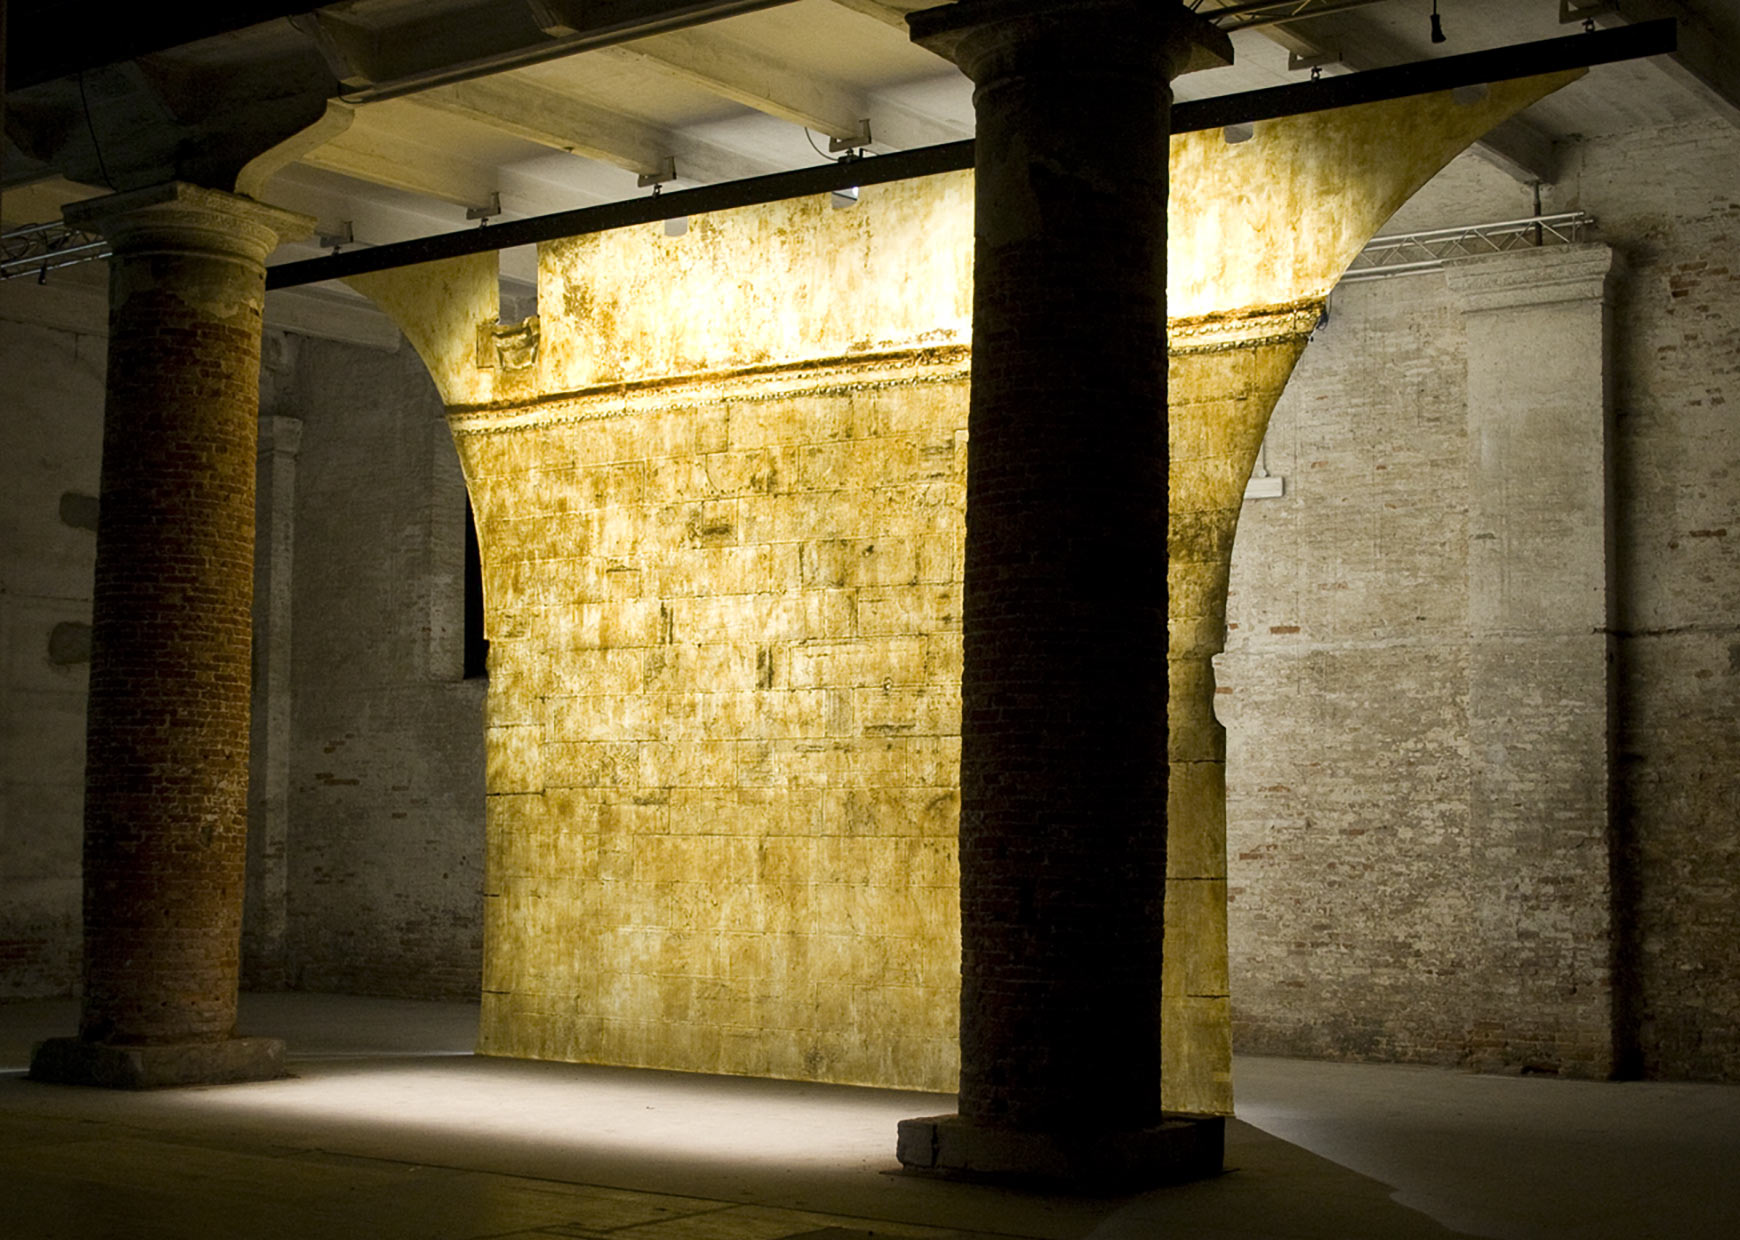 Jorge Otero-Pailos, “The Ethics of Dust: Doge’s Palace” (2009) as exhibited in the Corderie of the 53rd Venice Art Biennale. Collection of Thyssen-Bornemisza Art Contemporary Foundation T-BA21. 